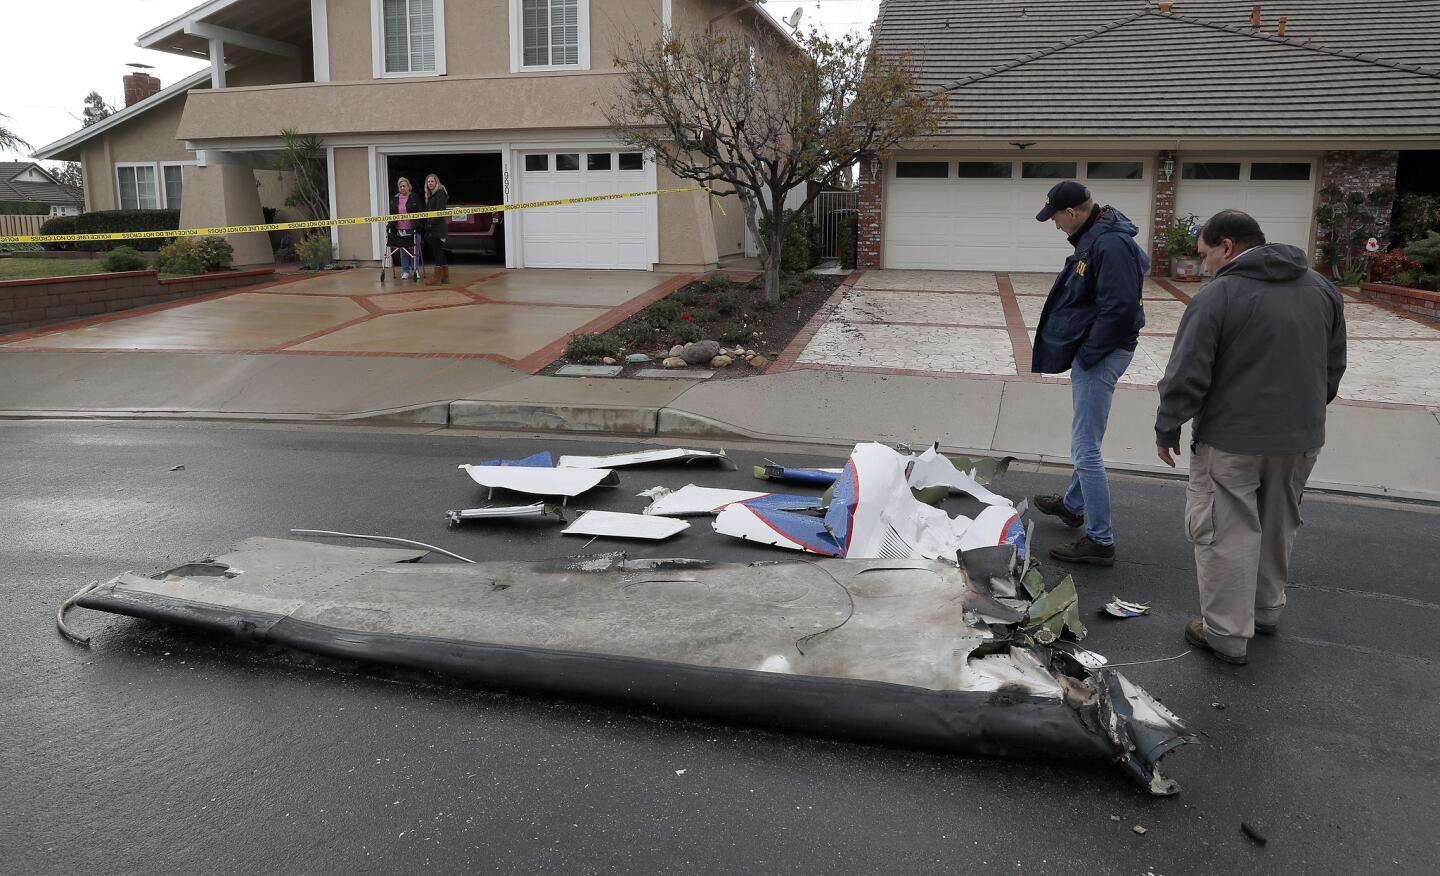 Peter Knudson, a media relations specialist with the National Transportation Safety Board, left, and air safety investigator Ricardo Asensio review pieces of a Cessna airplane that crashed into a Yorba Linda home. Five people, including pilot Antonio Pastini, were killed.